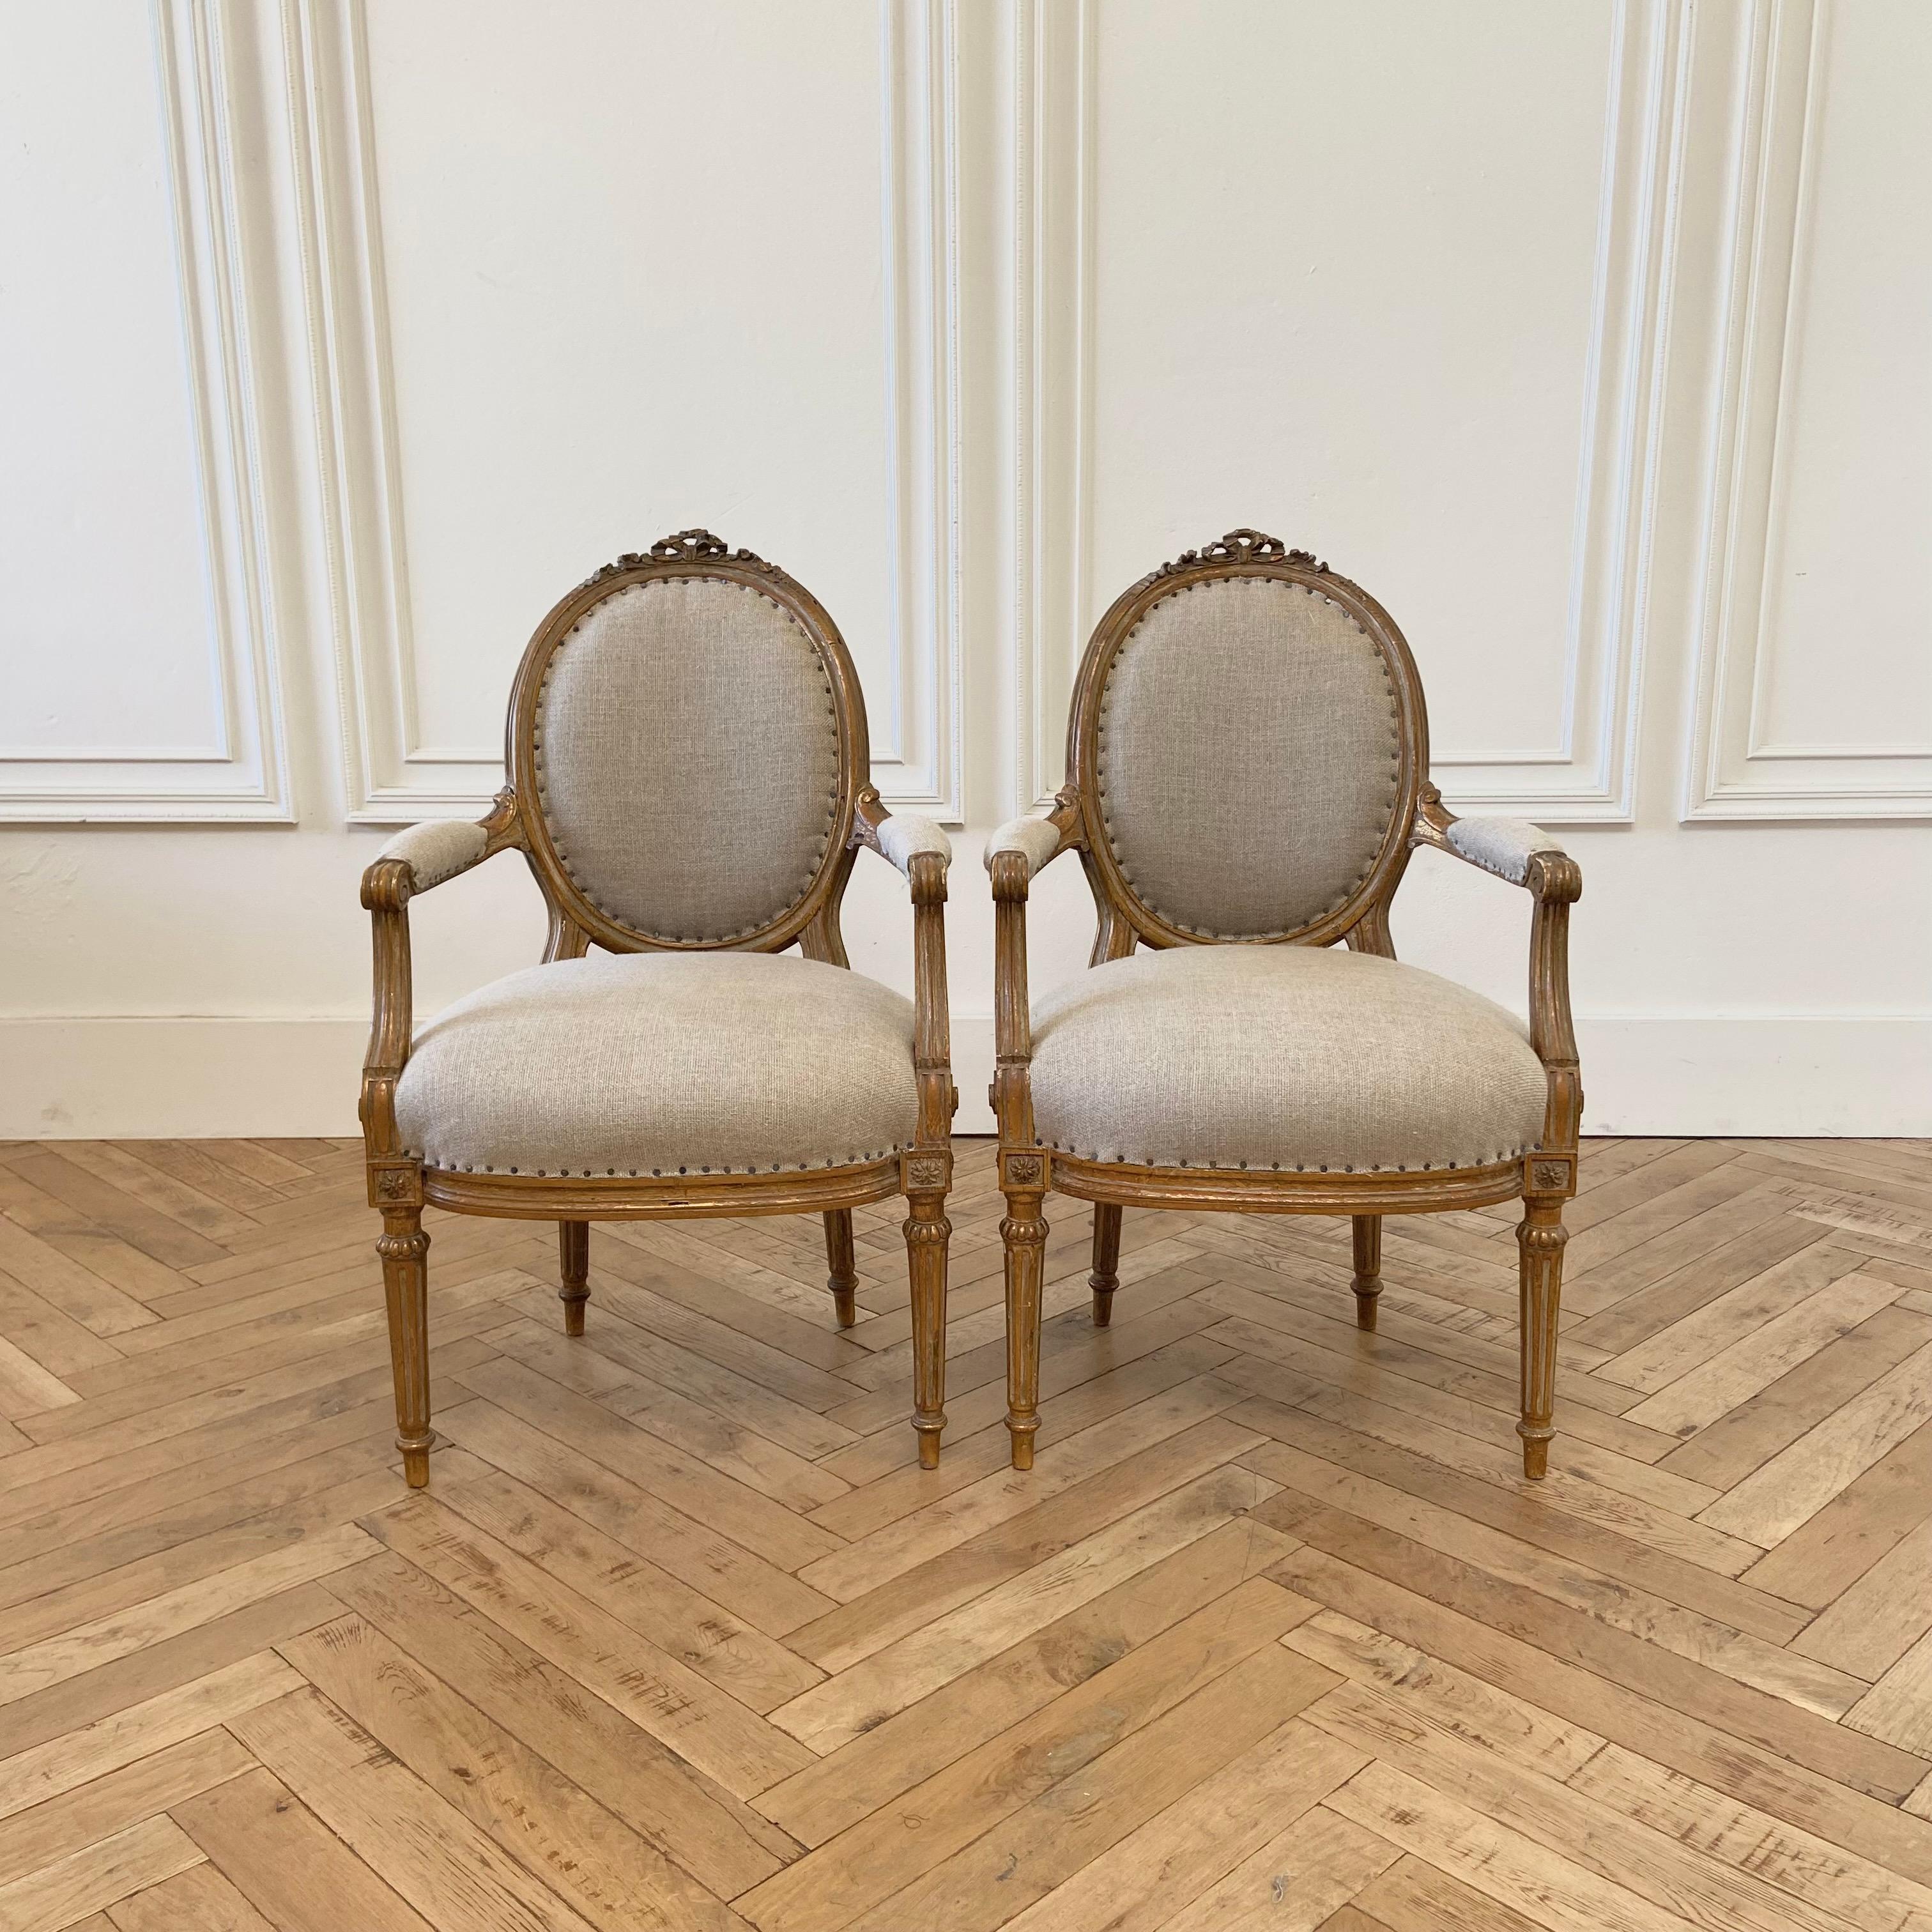 Antique pair of gilt wood open arm chairs upholstered in natural linen
Size:
23”W x 23”D x 36”H
Seat height: 19”
Seat depth: 19”
Arm height: 24”

These vintage chairs have the original finish, which is a weathered patina gilt wood. We have